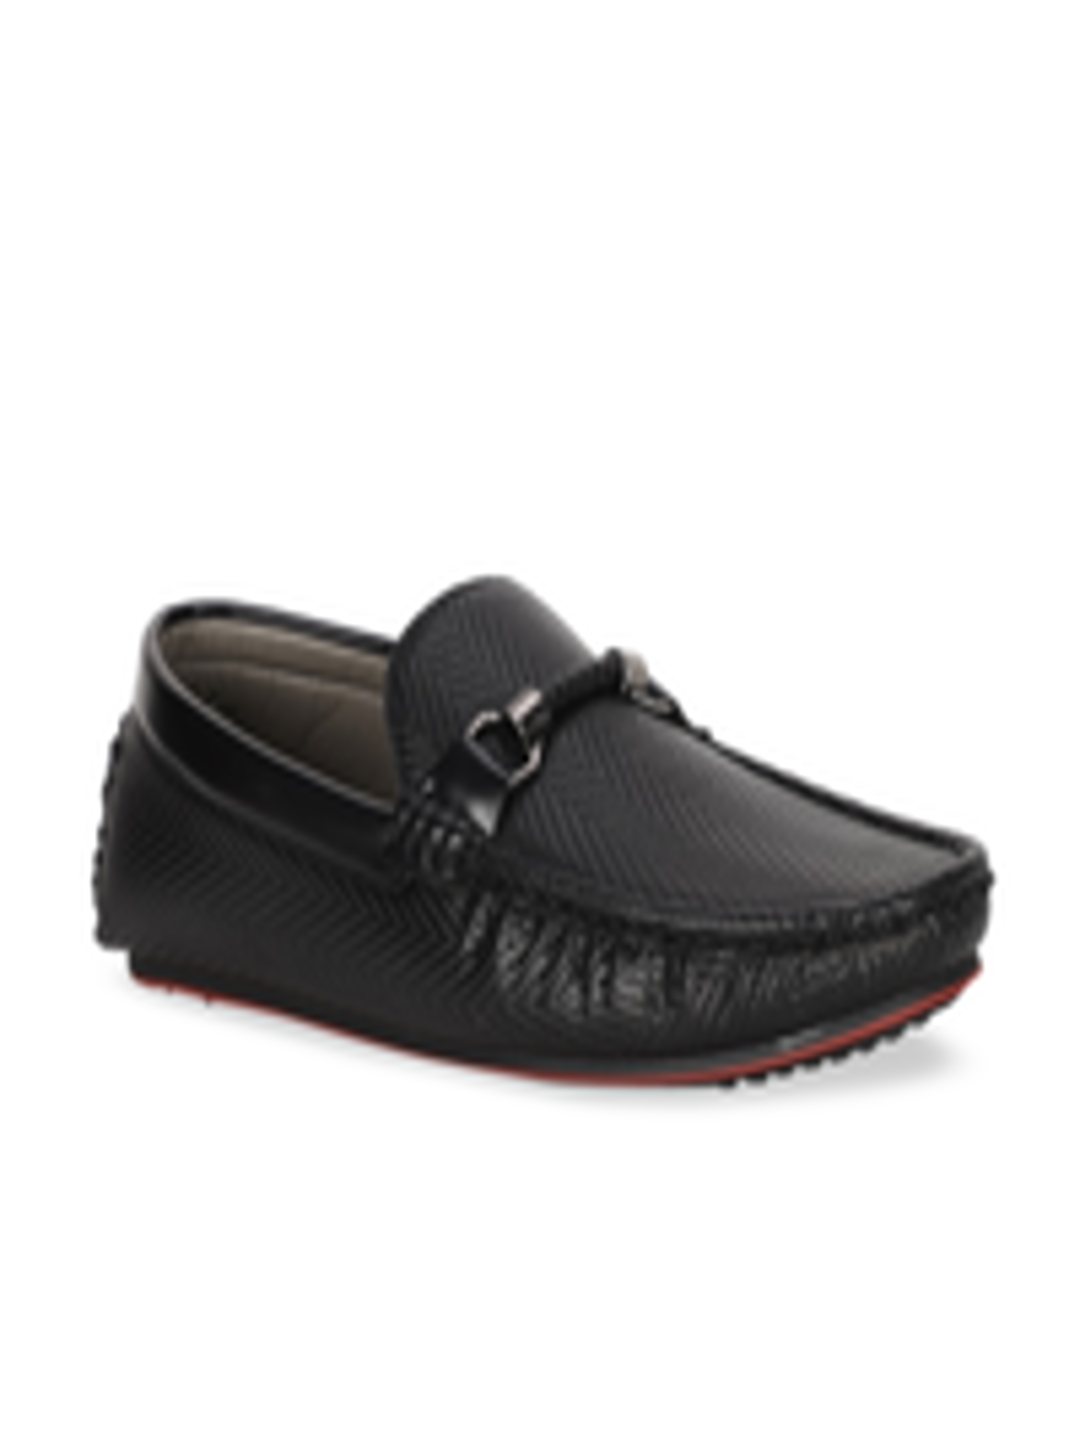 Buy Bata Men Black Textured Leather Loafers - Casual Shoes for Men ...